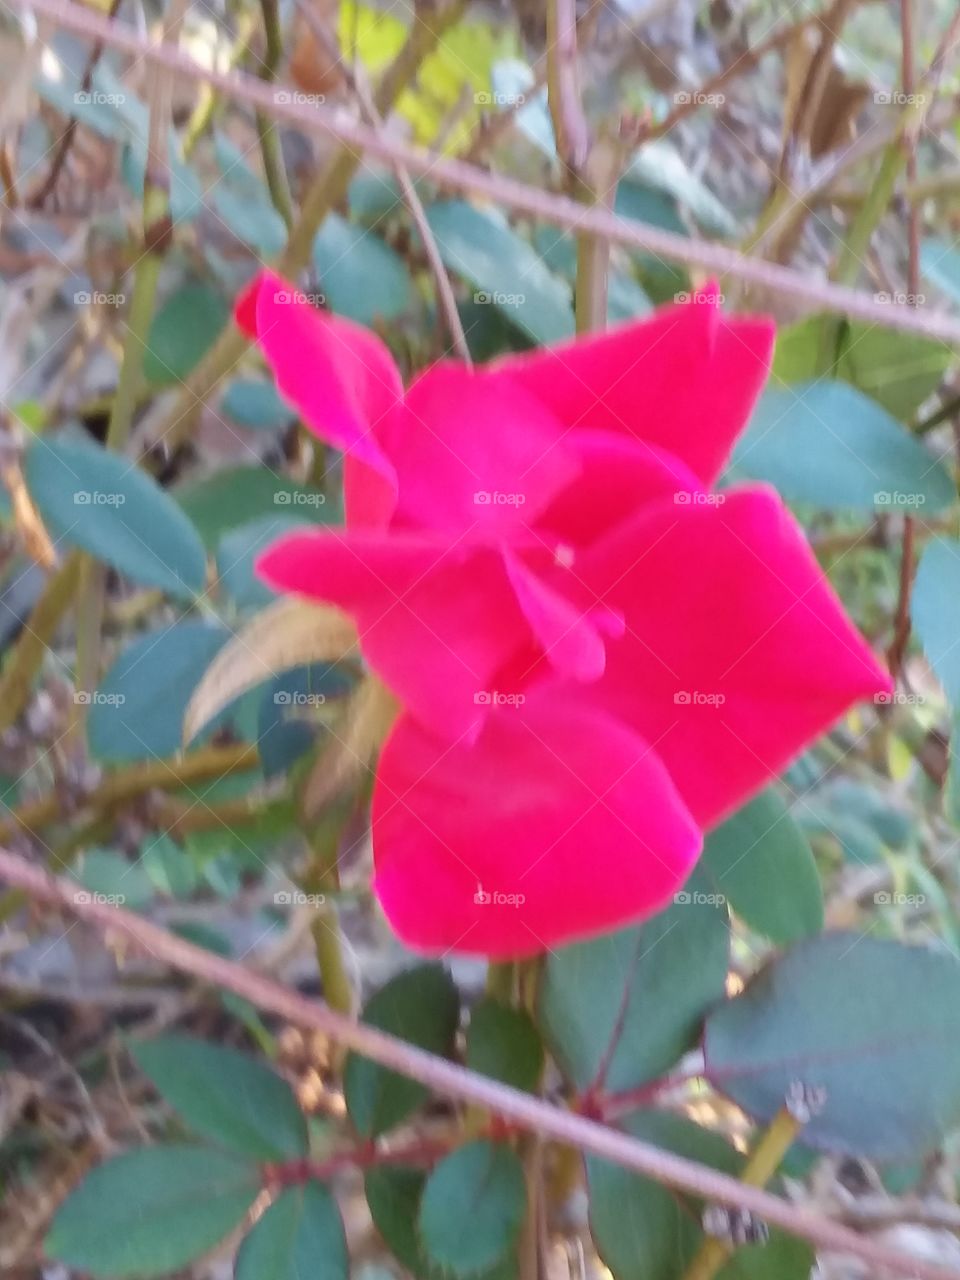 late blooming rose